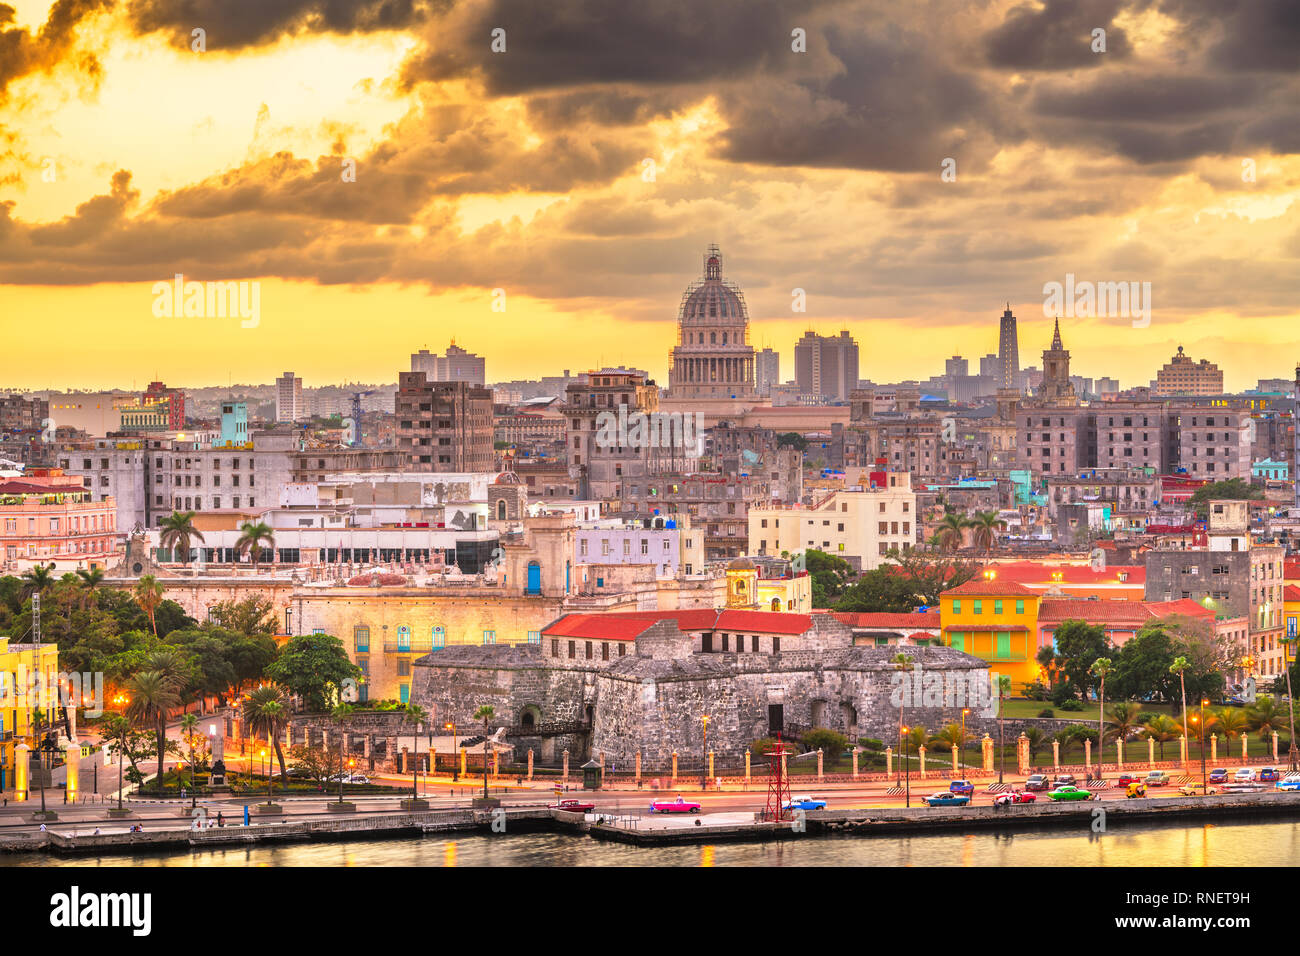 Havana, Cuba downtown skyline over the Malecon waterfront at dusk. Stock Photo